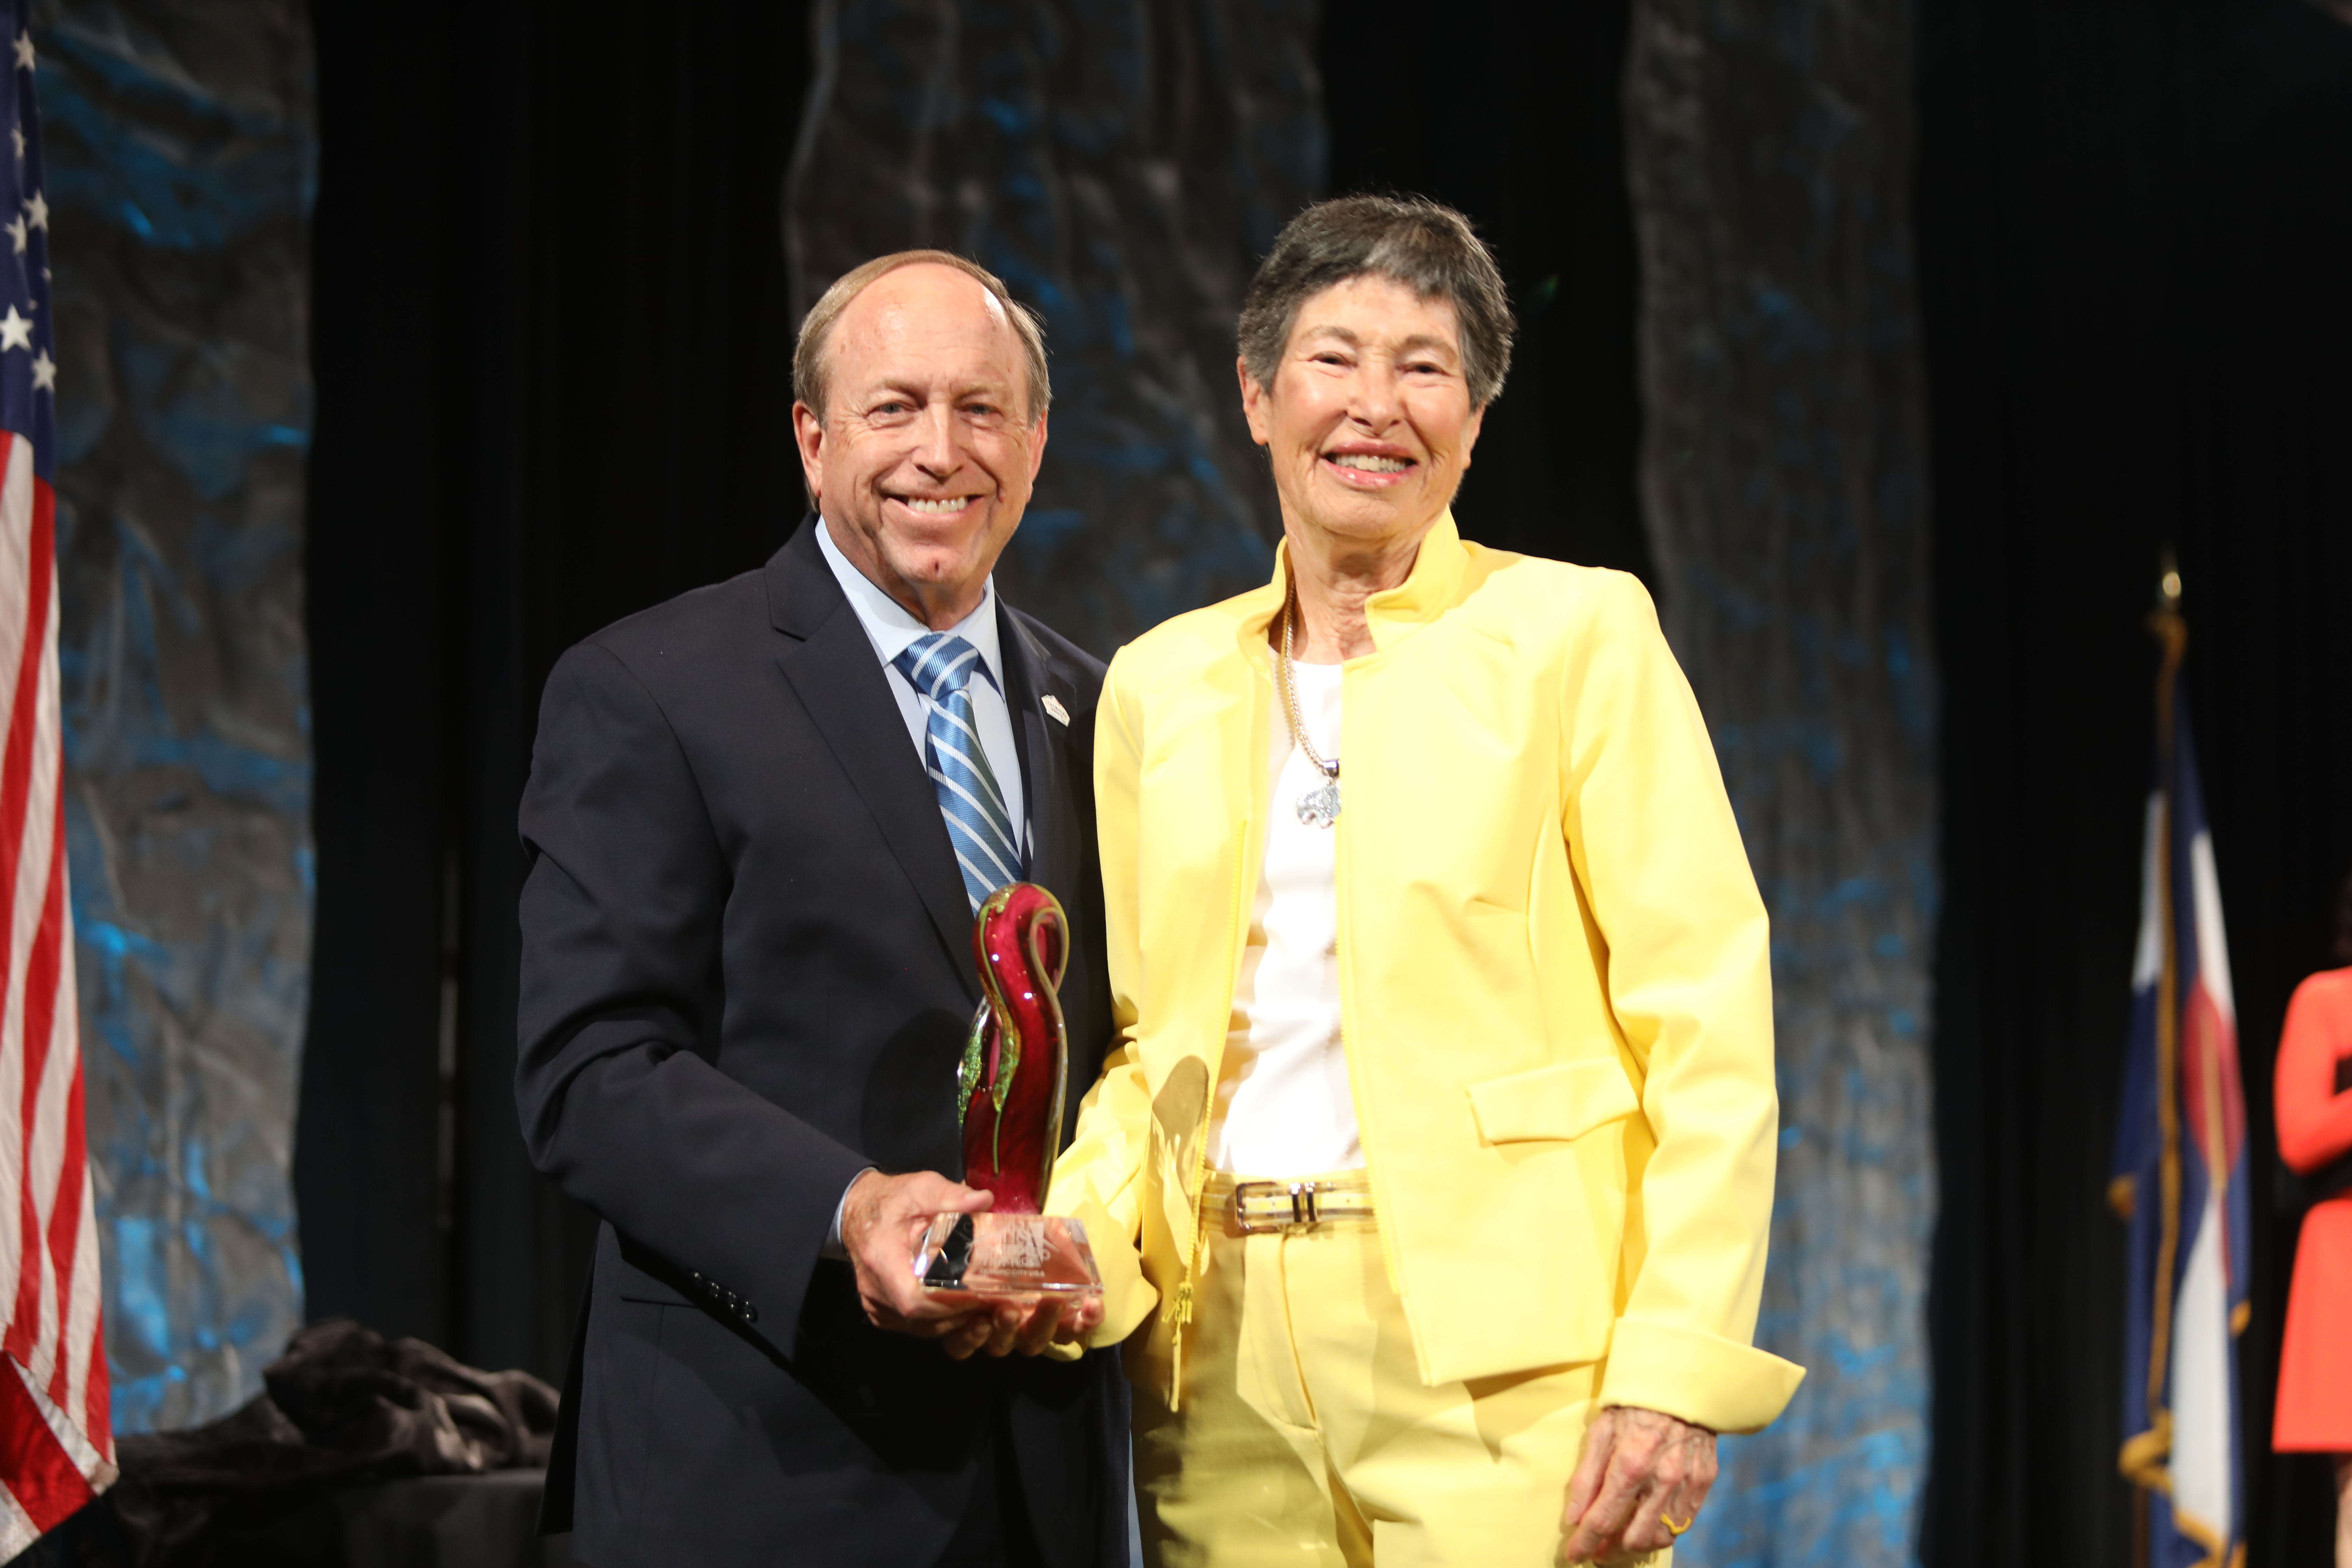 Mayor John Suthers and Lyda Hill with her Lifetime Achievement Award